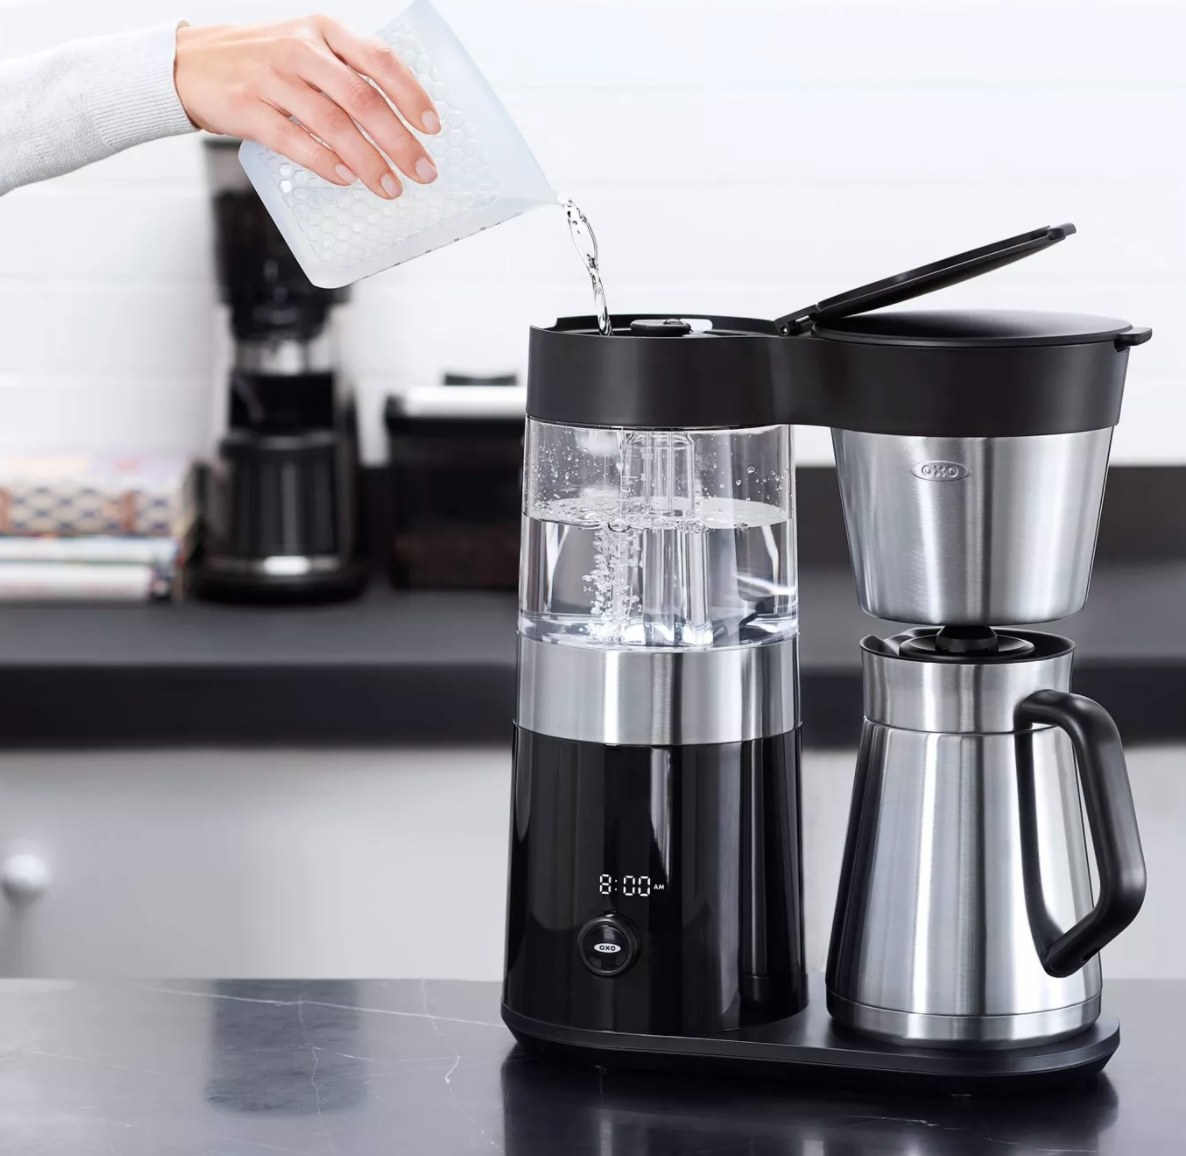 Model&#x27;s hand pouring water into a black and silver OXO coffee maker